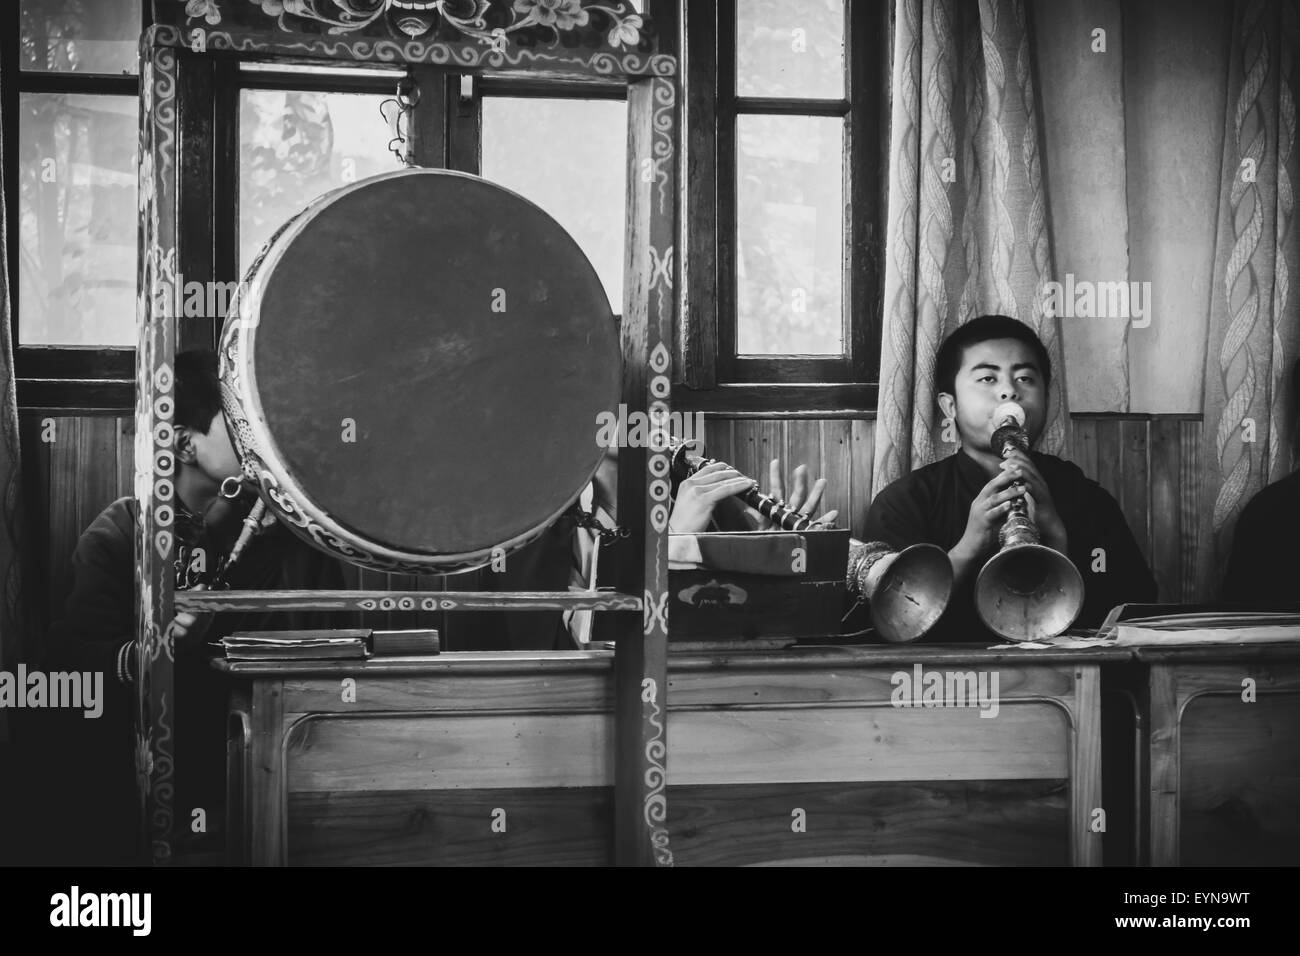 Buddhist priests, Lamas, praying inside a monastery in India, playing traditional flute, gong with copy space, black and white Stock Photo